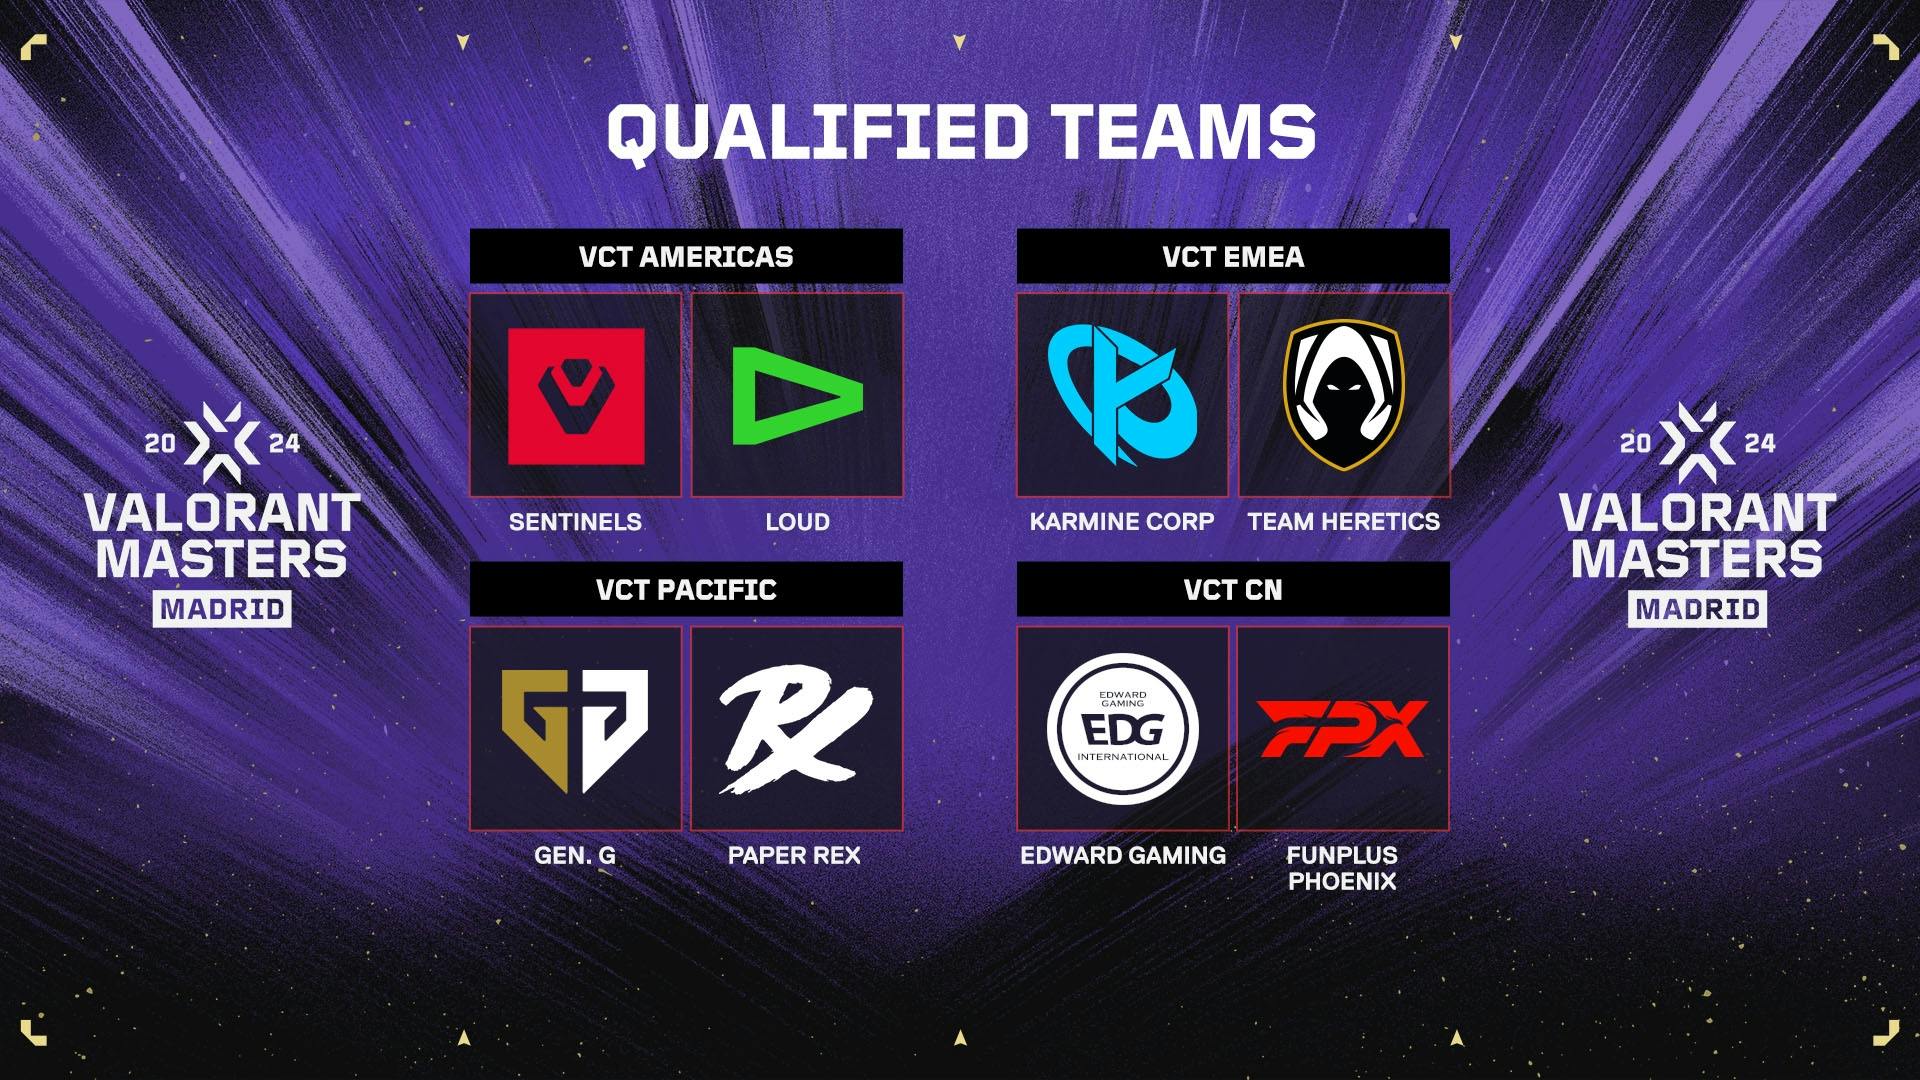 All the qualified teams for VCT Masters Madrid, two from each region. 